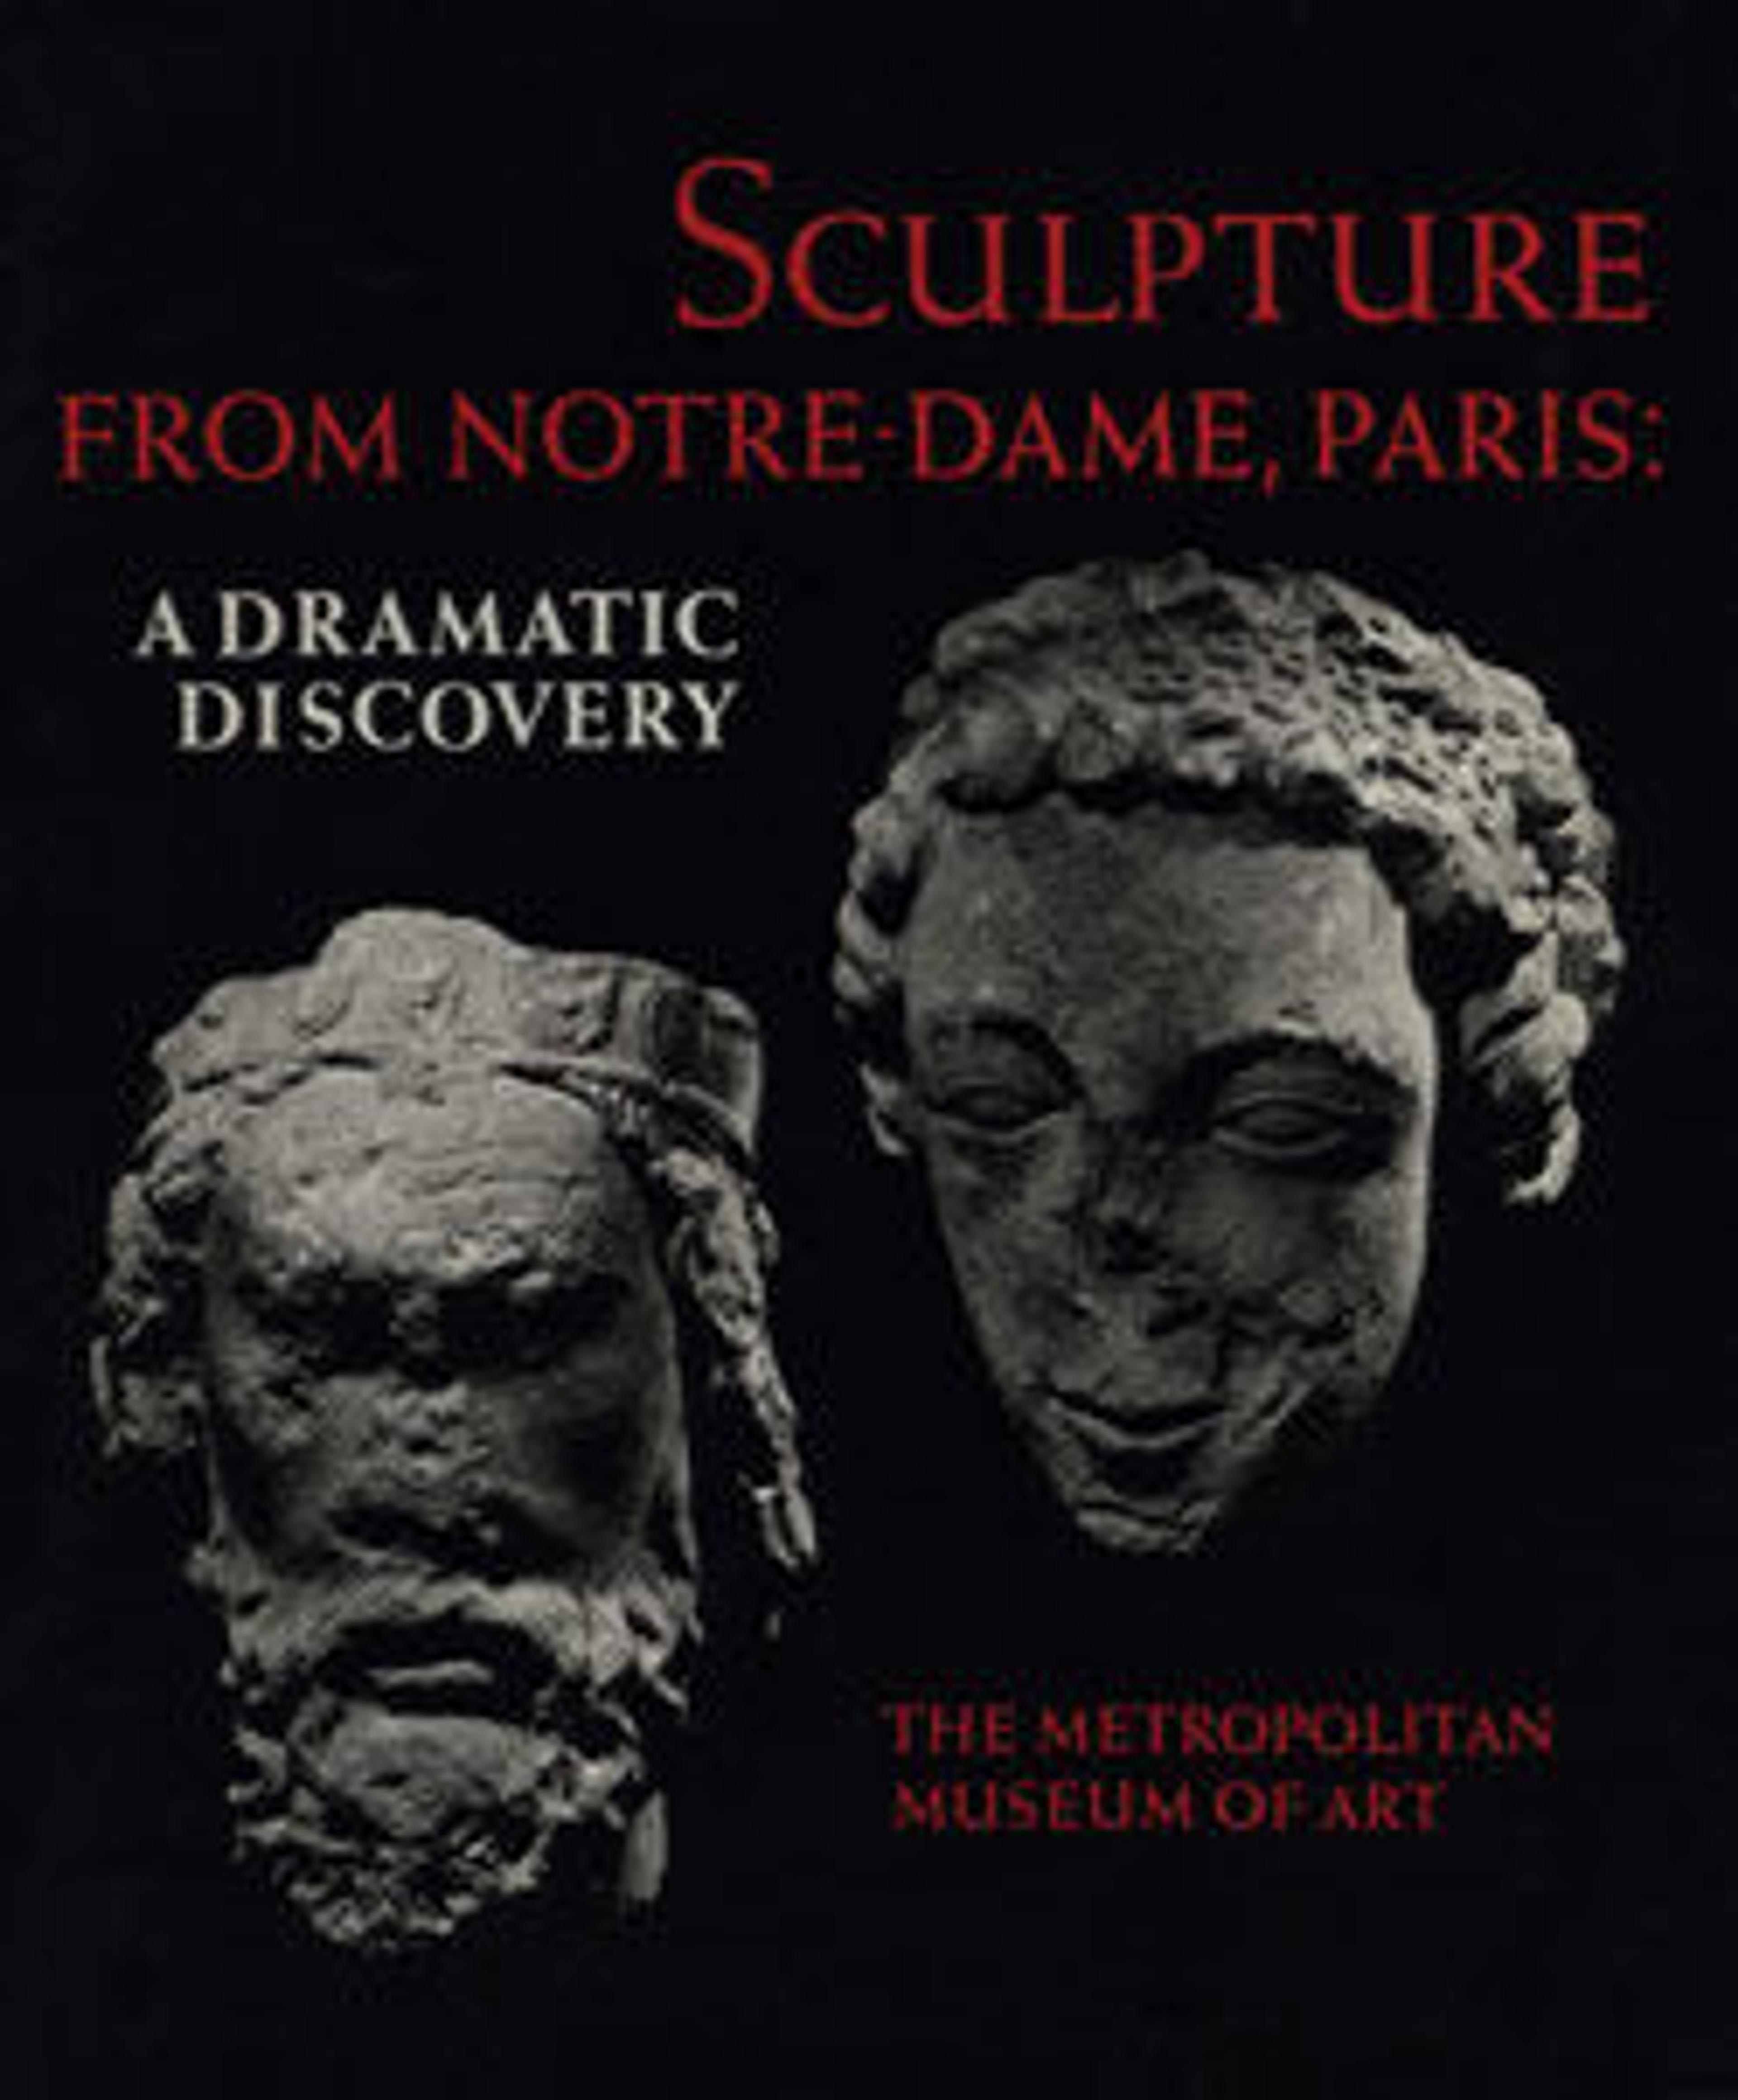 Sculpture from Notre-Dame, Paris: A Dramatic Discovery